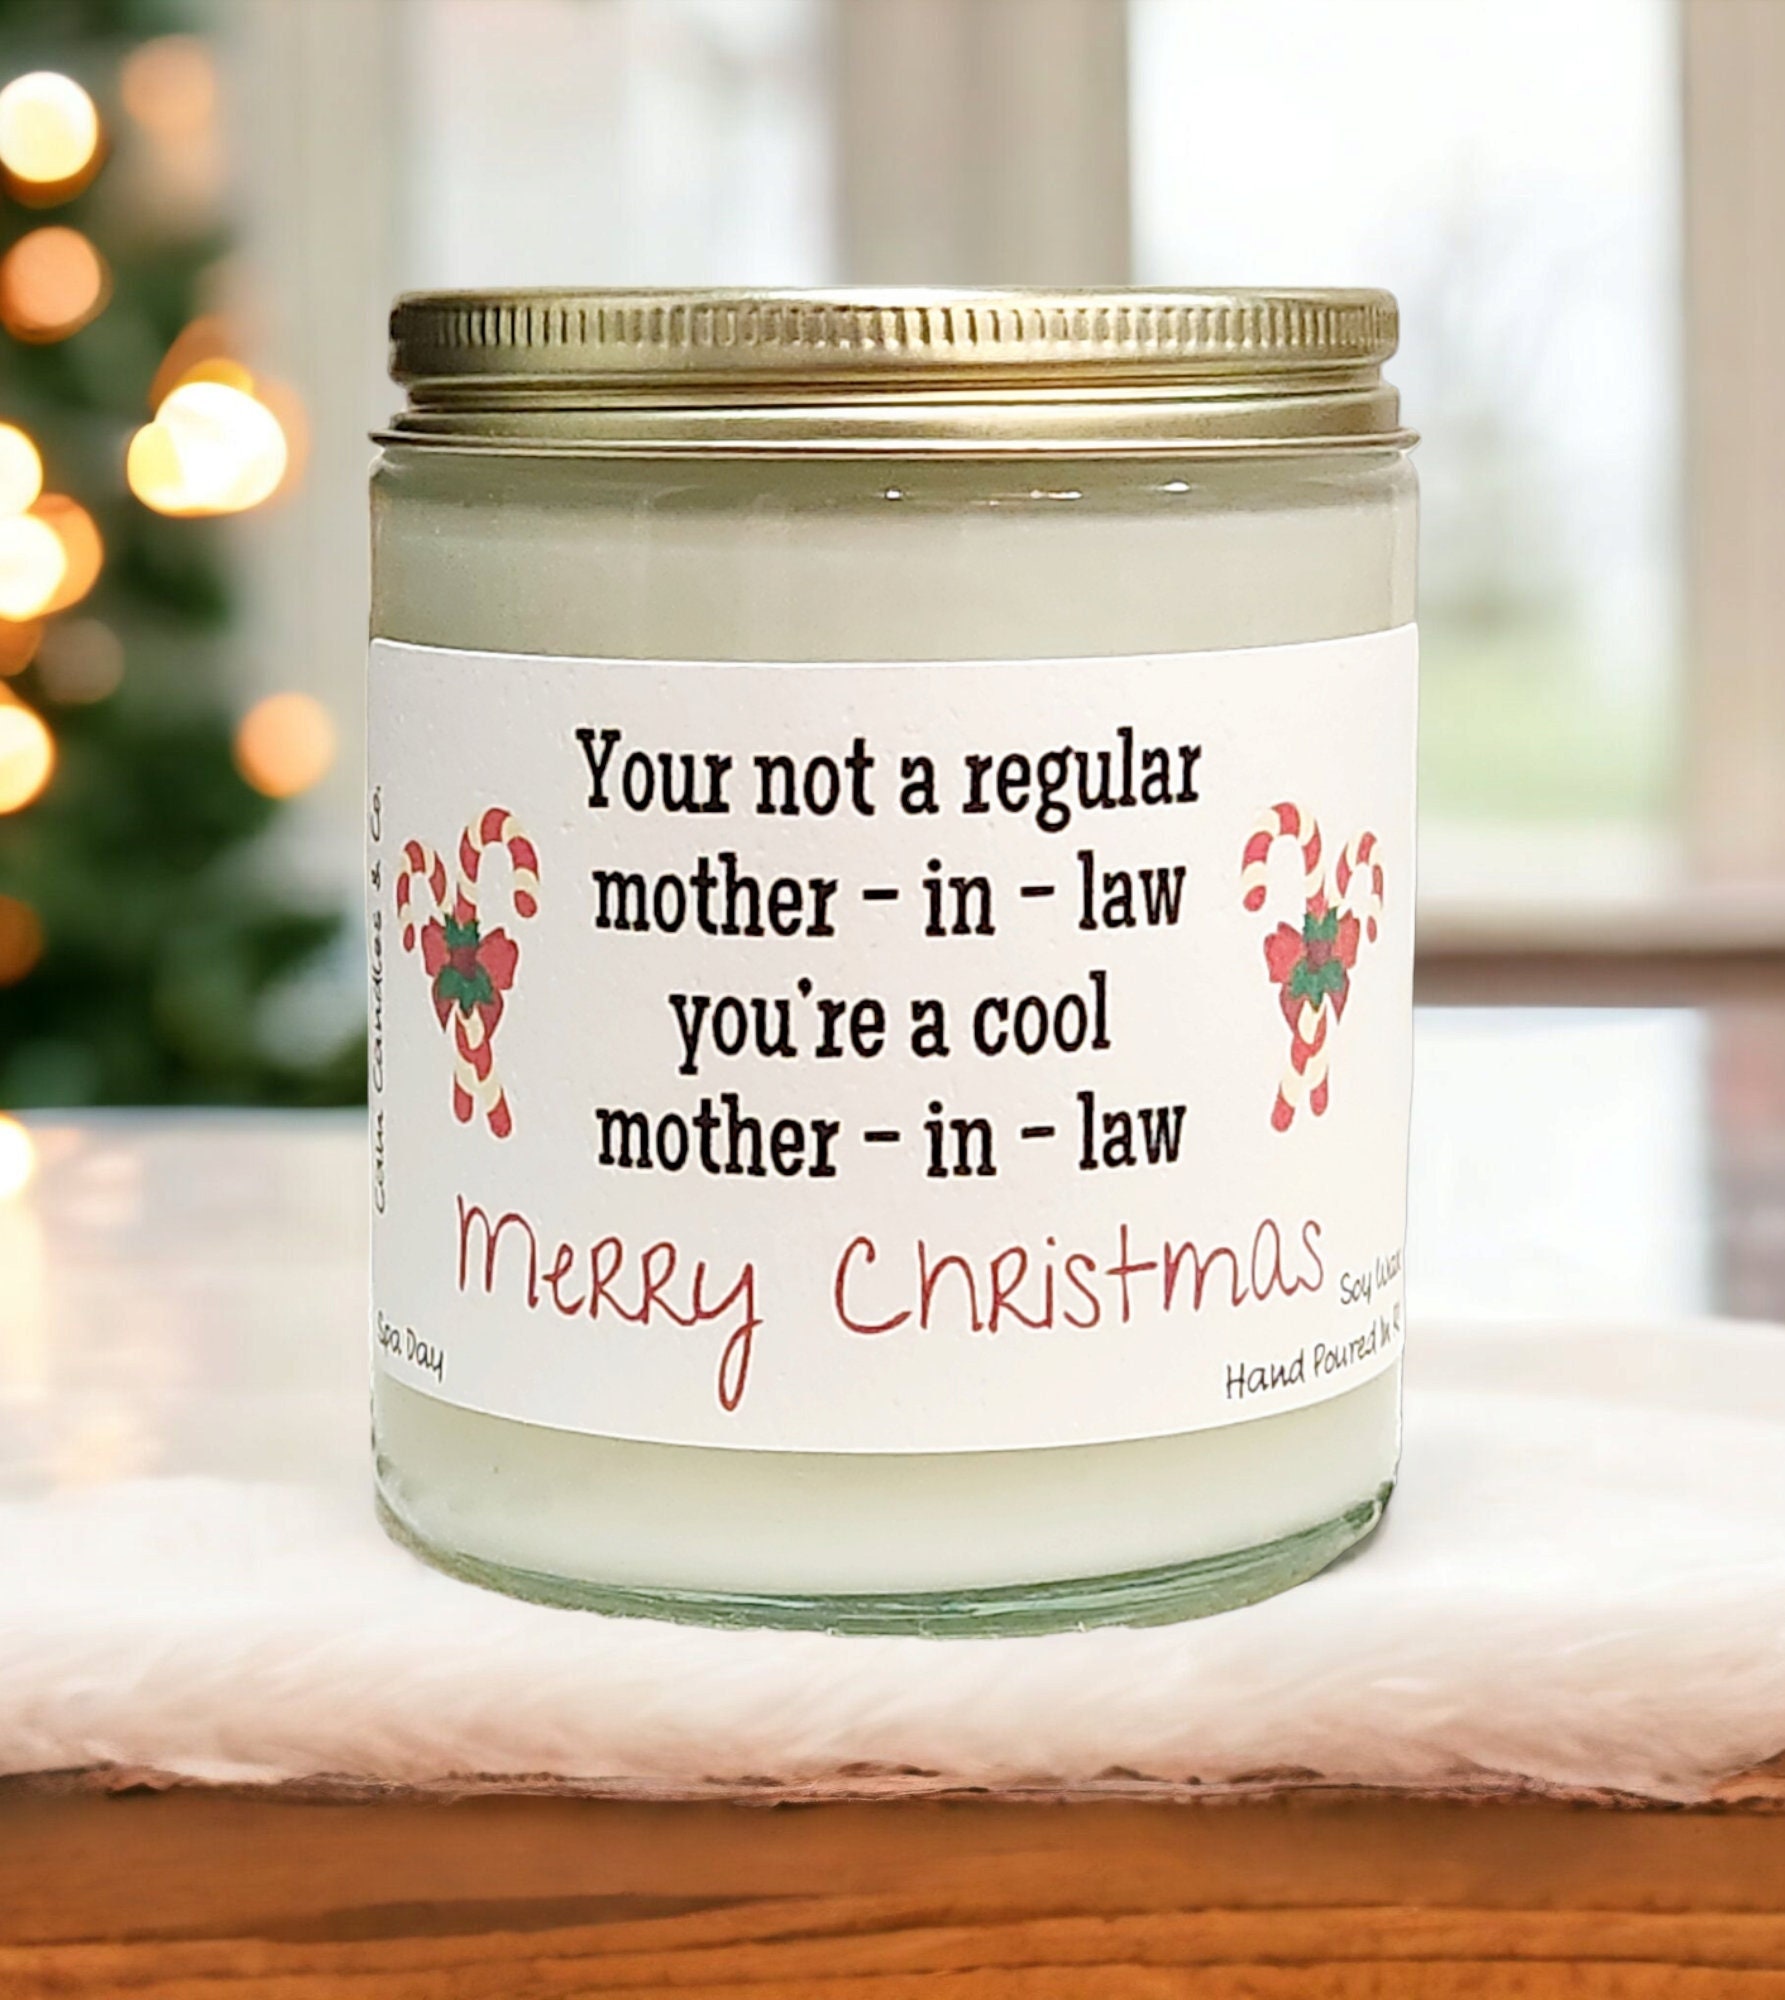 59 Genius Christmas Gifts For Mother In Law That Will Make Her